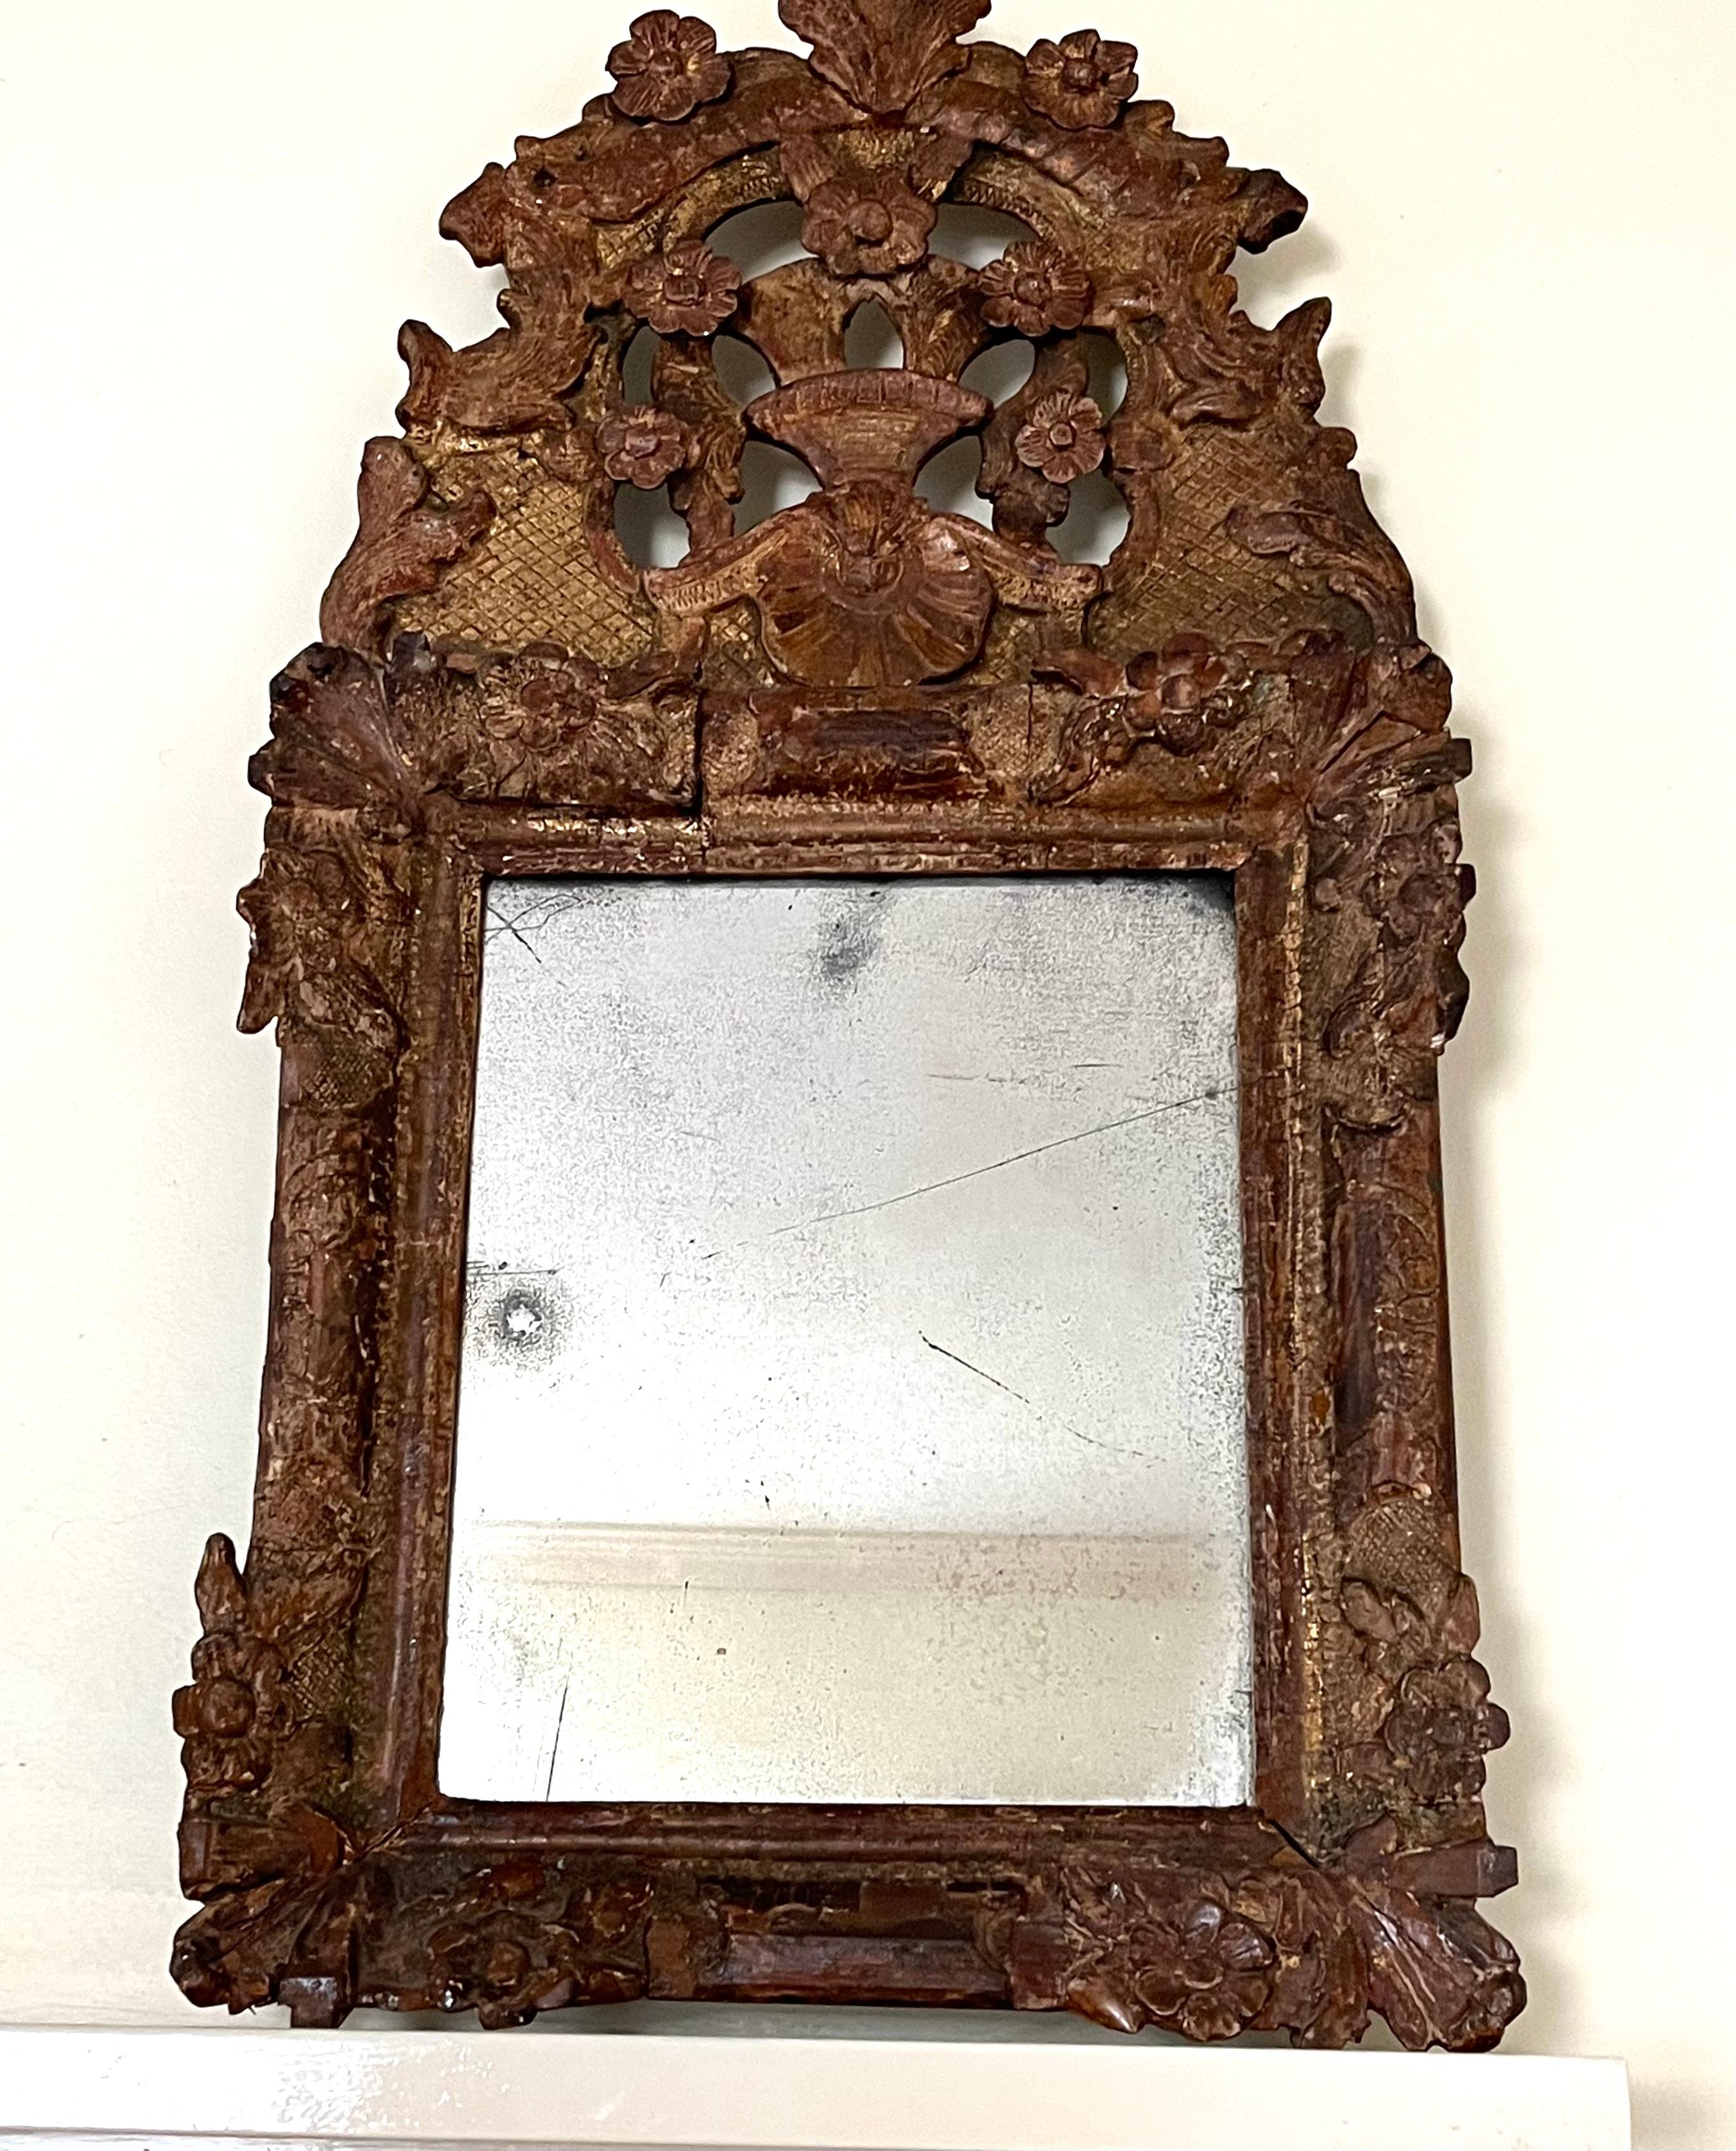 An early 18th century Regence period giltwood framed mirror with upper crest depicting a basket of flowers over a scallop shell with other rocaille decoration. It retains its original mercury glass plate with expected wear and hazing to the glass.